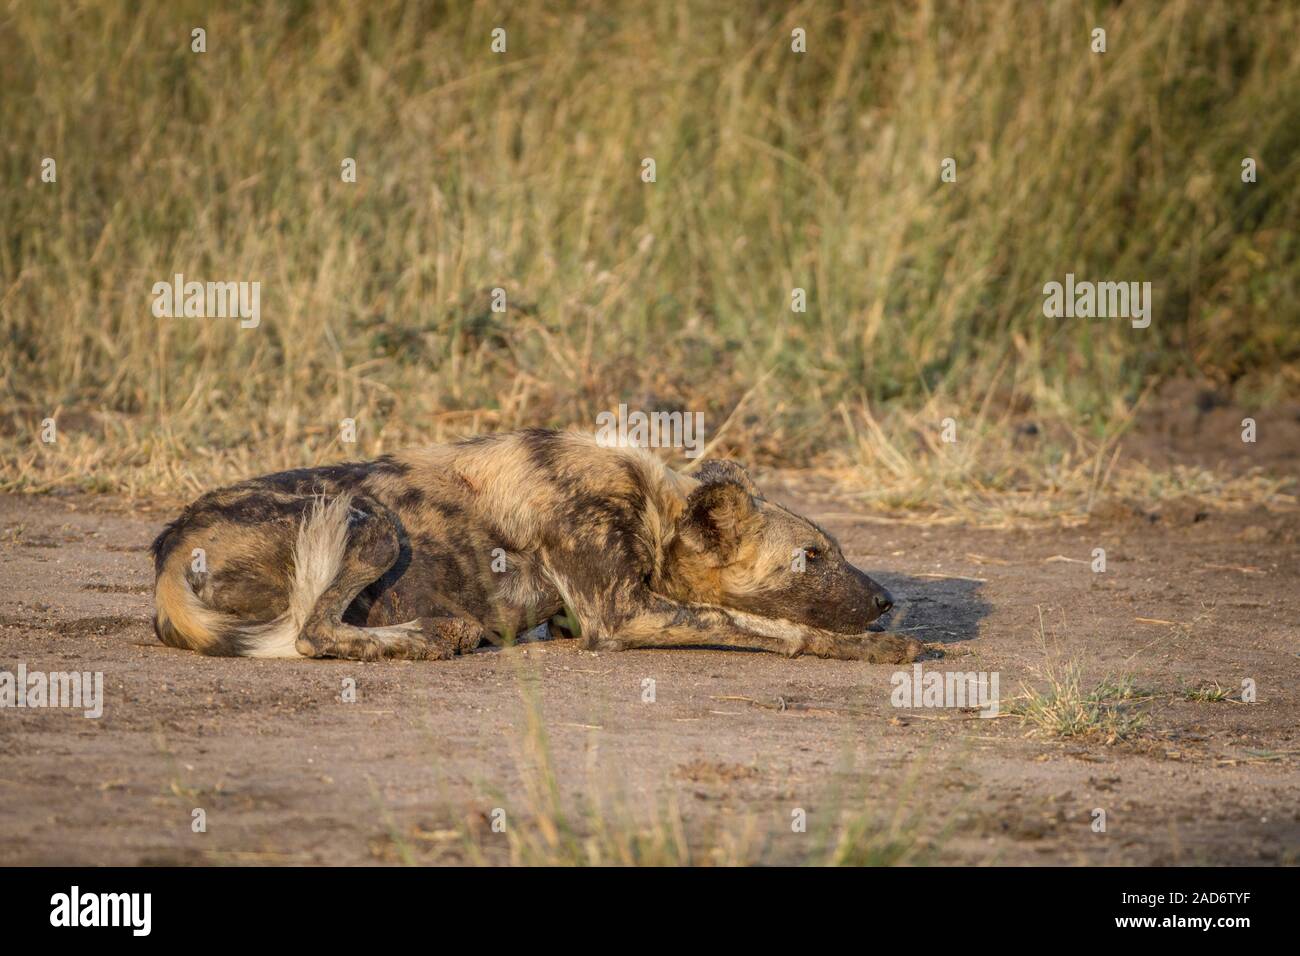 African wild dog laying on the dirt. Stock Photo